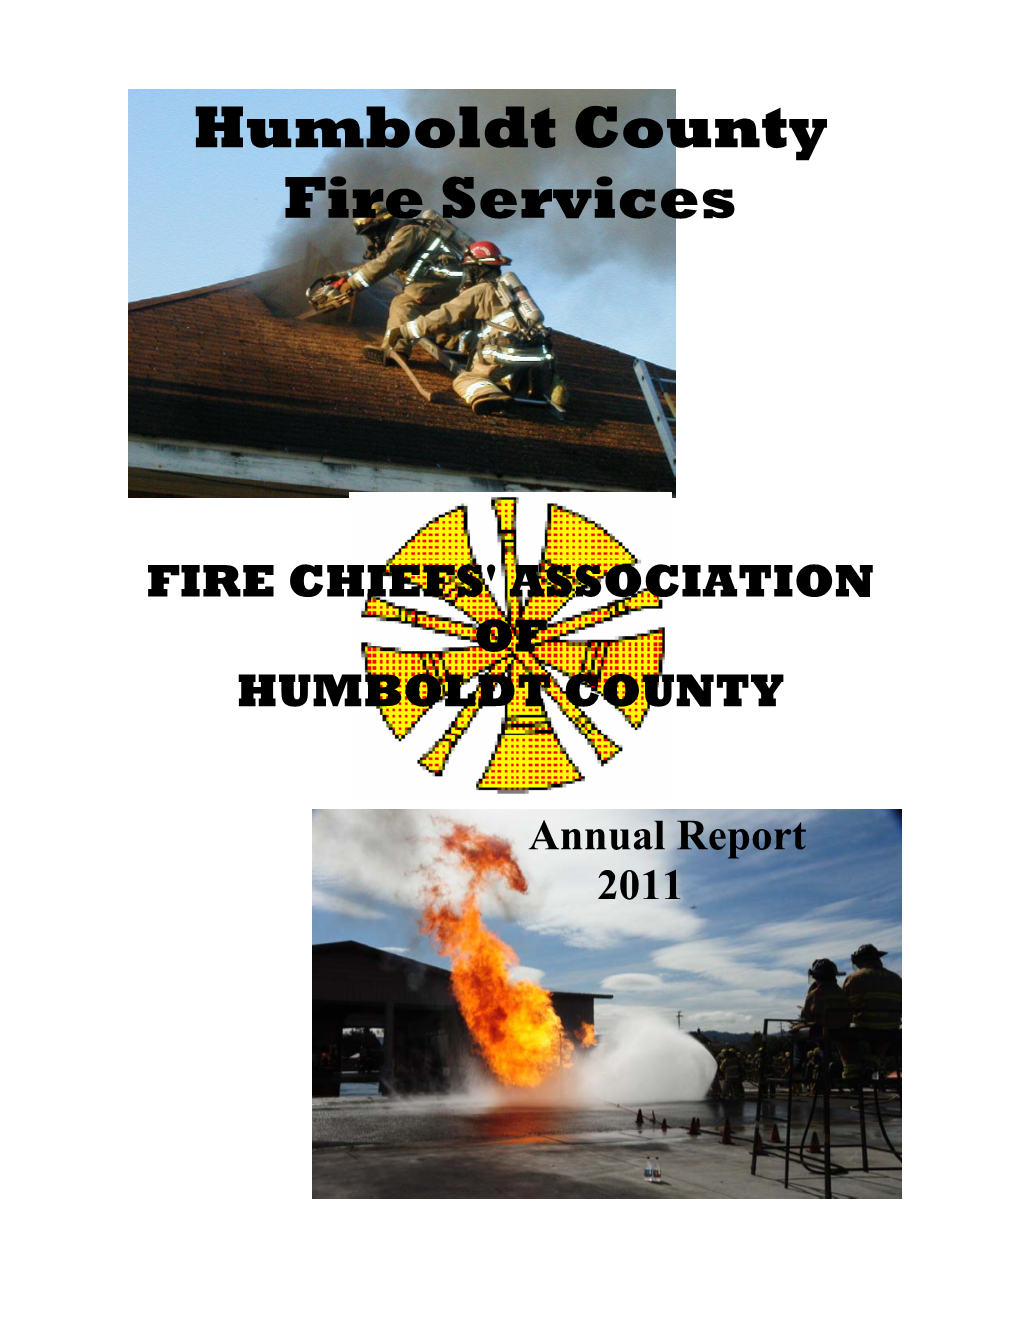 Humboldt County Fire Services